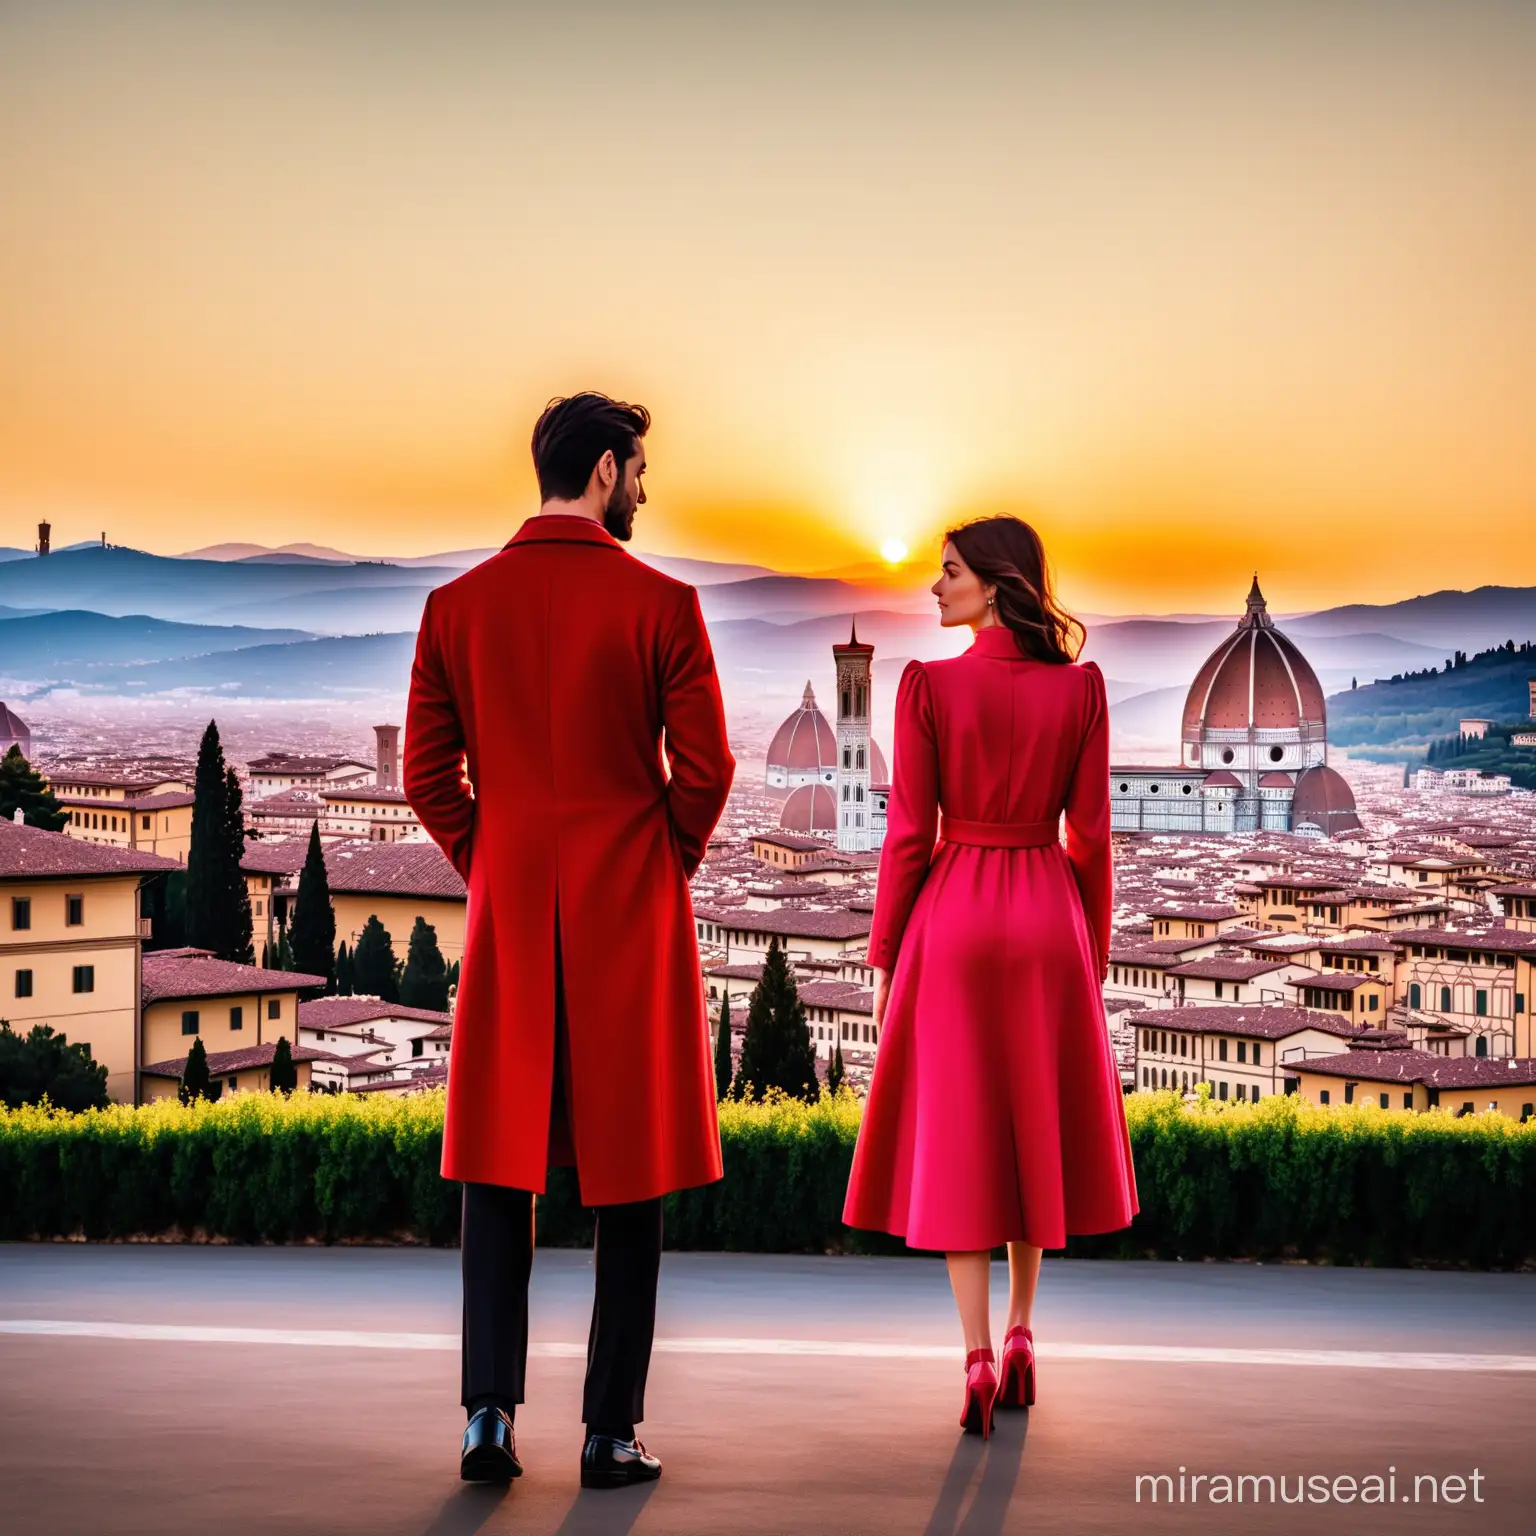 Romantic Couple Watching Sunset on Hill in Florence Italy